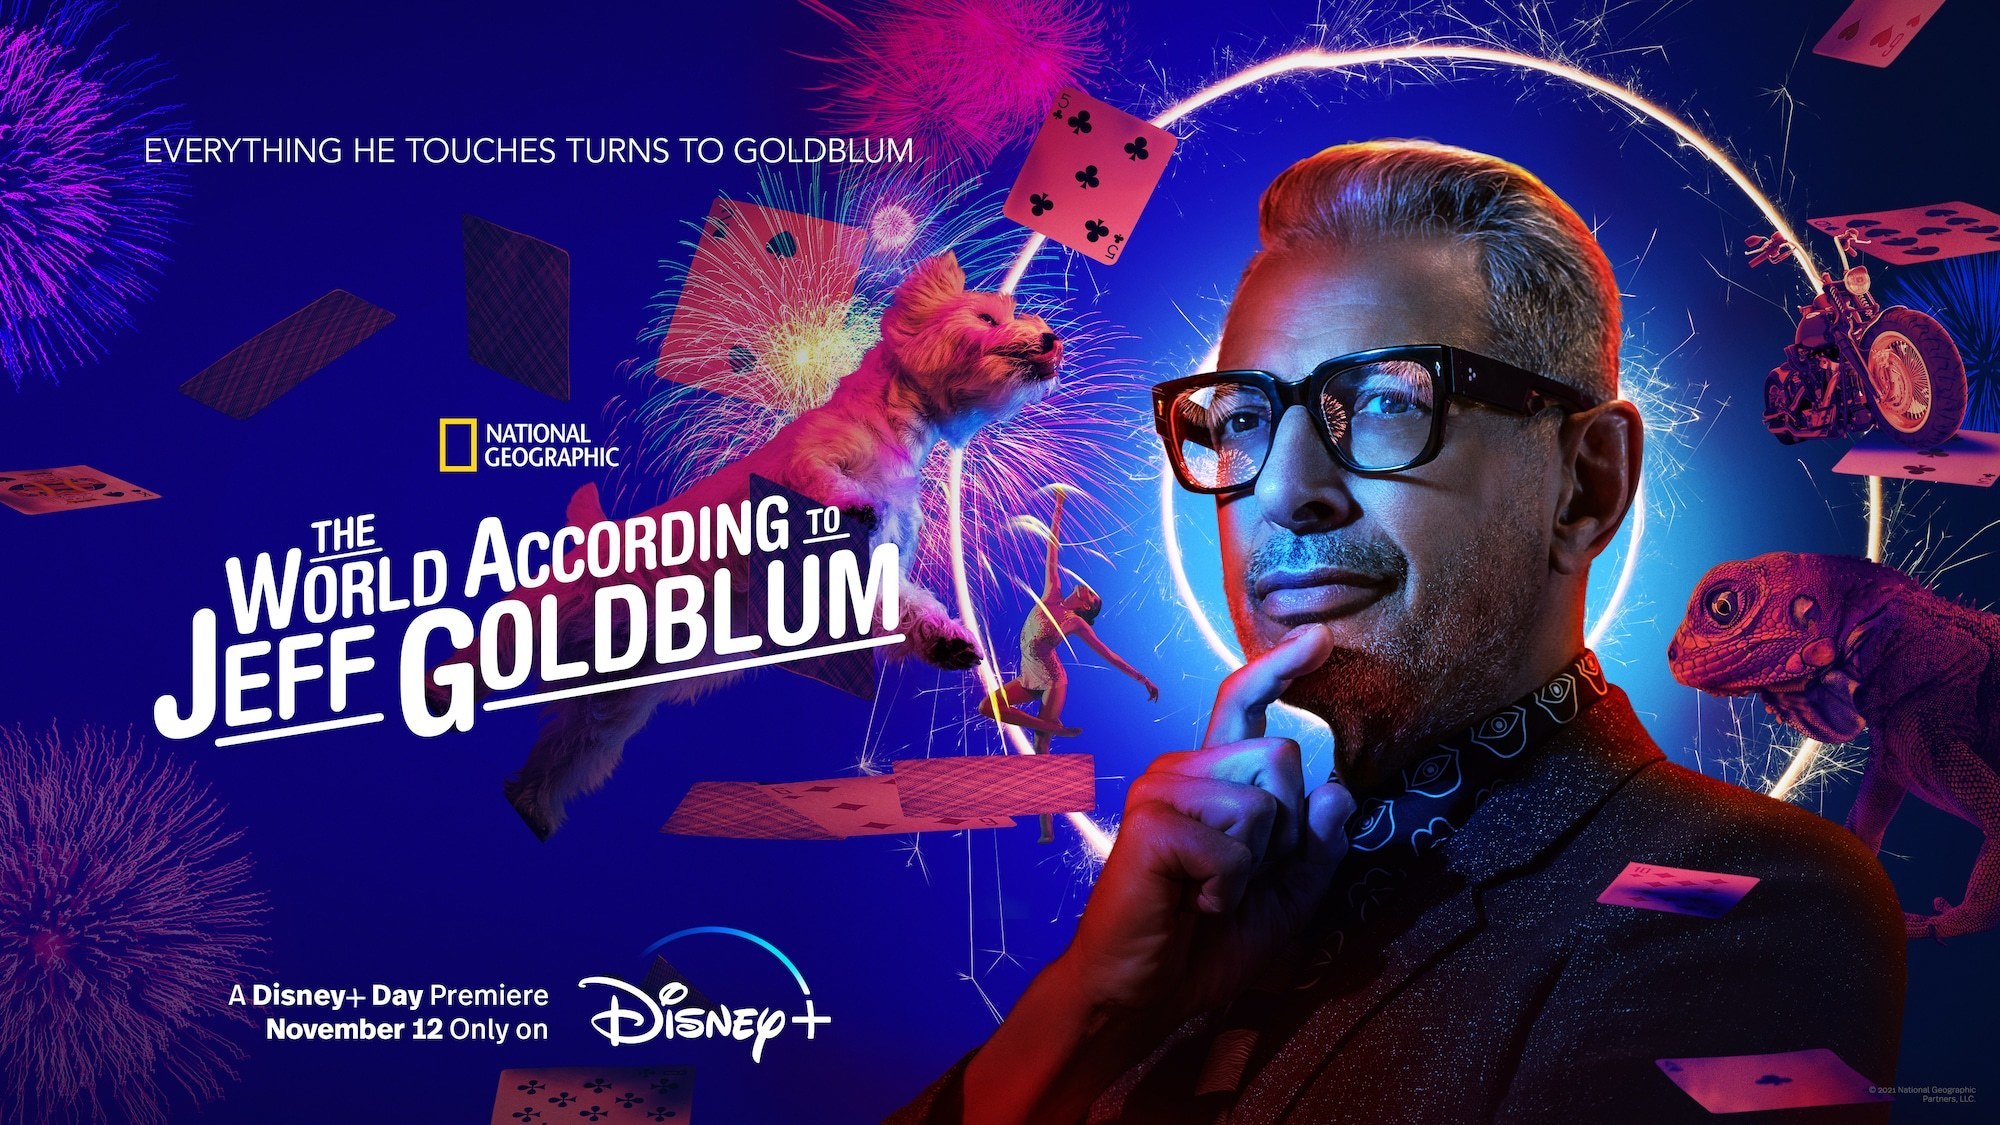 IN CELEBRATION OF JEFF GOLDBLUM’S BIRTHDAY, DISNEY+ RELEASES THE OFFICIAL TRAILER AND KEY ART FOR THE SECOND SEASON OF ‘THE WORLD ACCORDING TO JEFF GOLDBLUM’